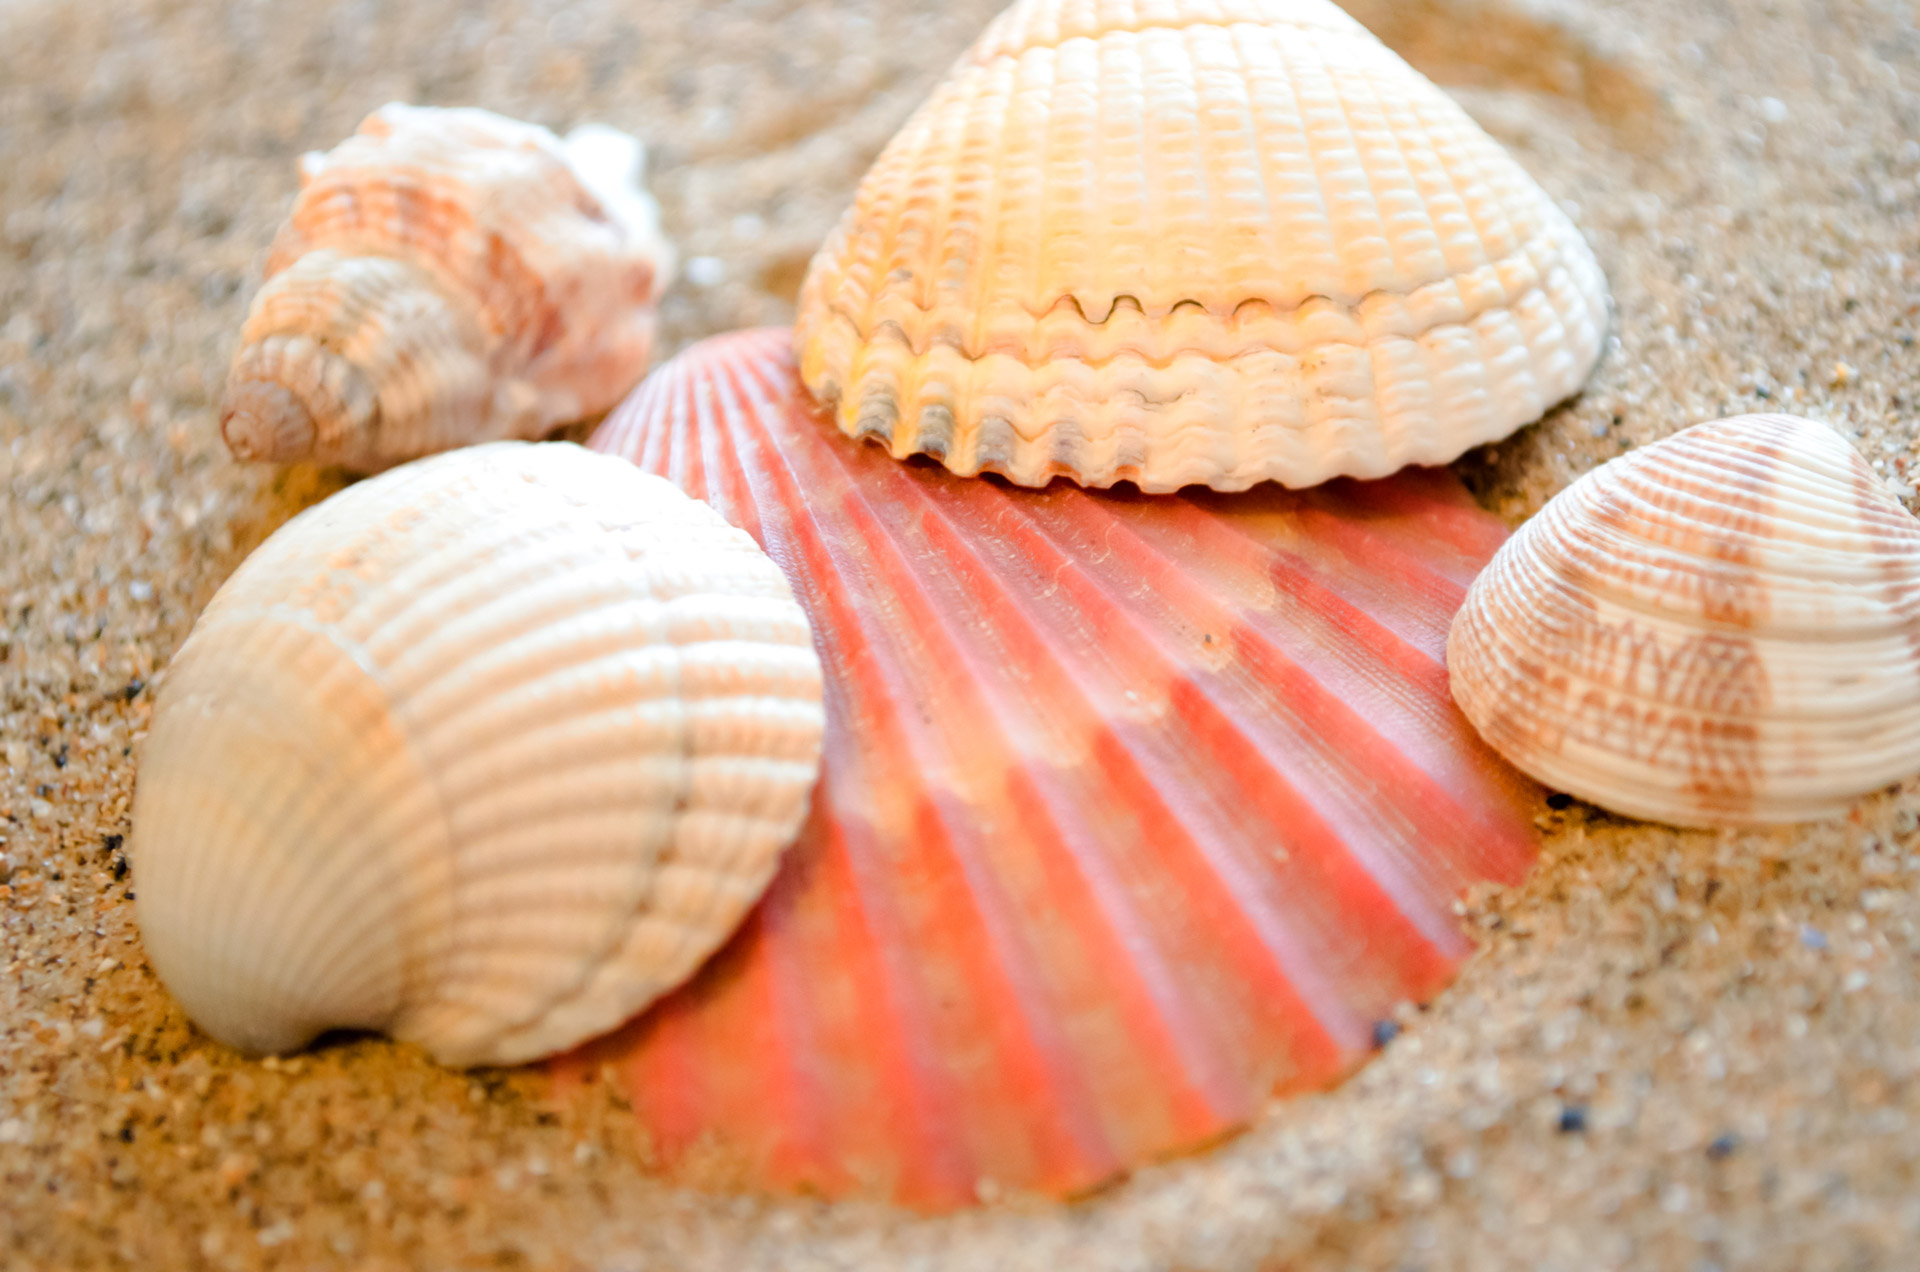 shell-free-stock-photo-public-domain-pictures